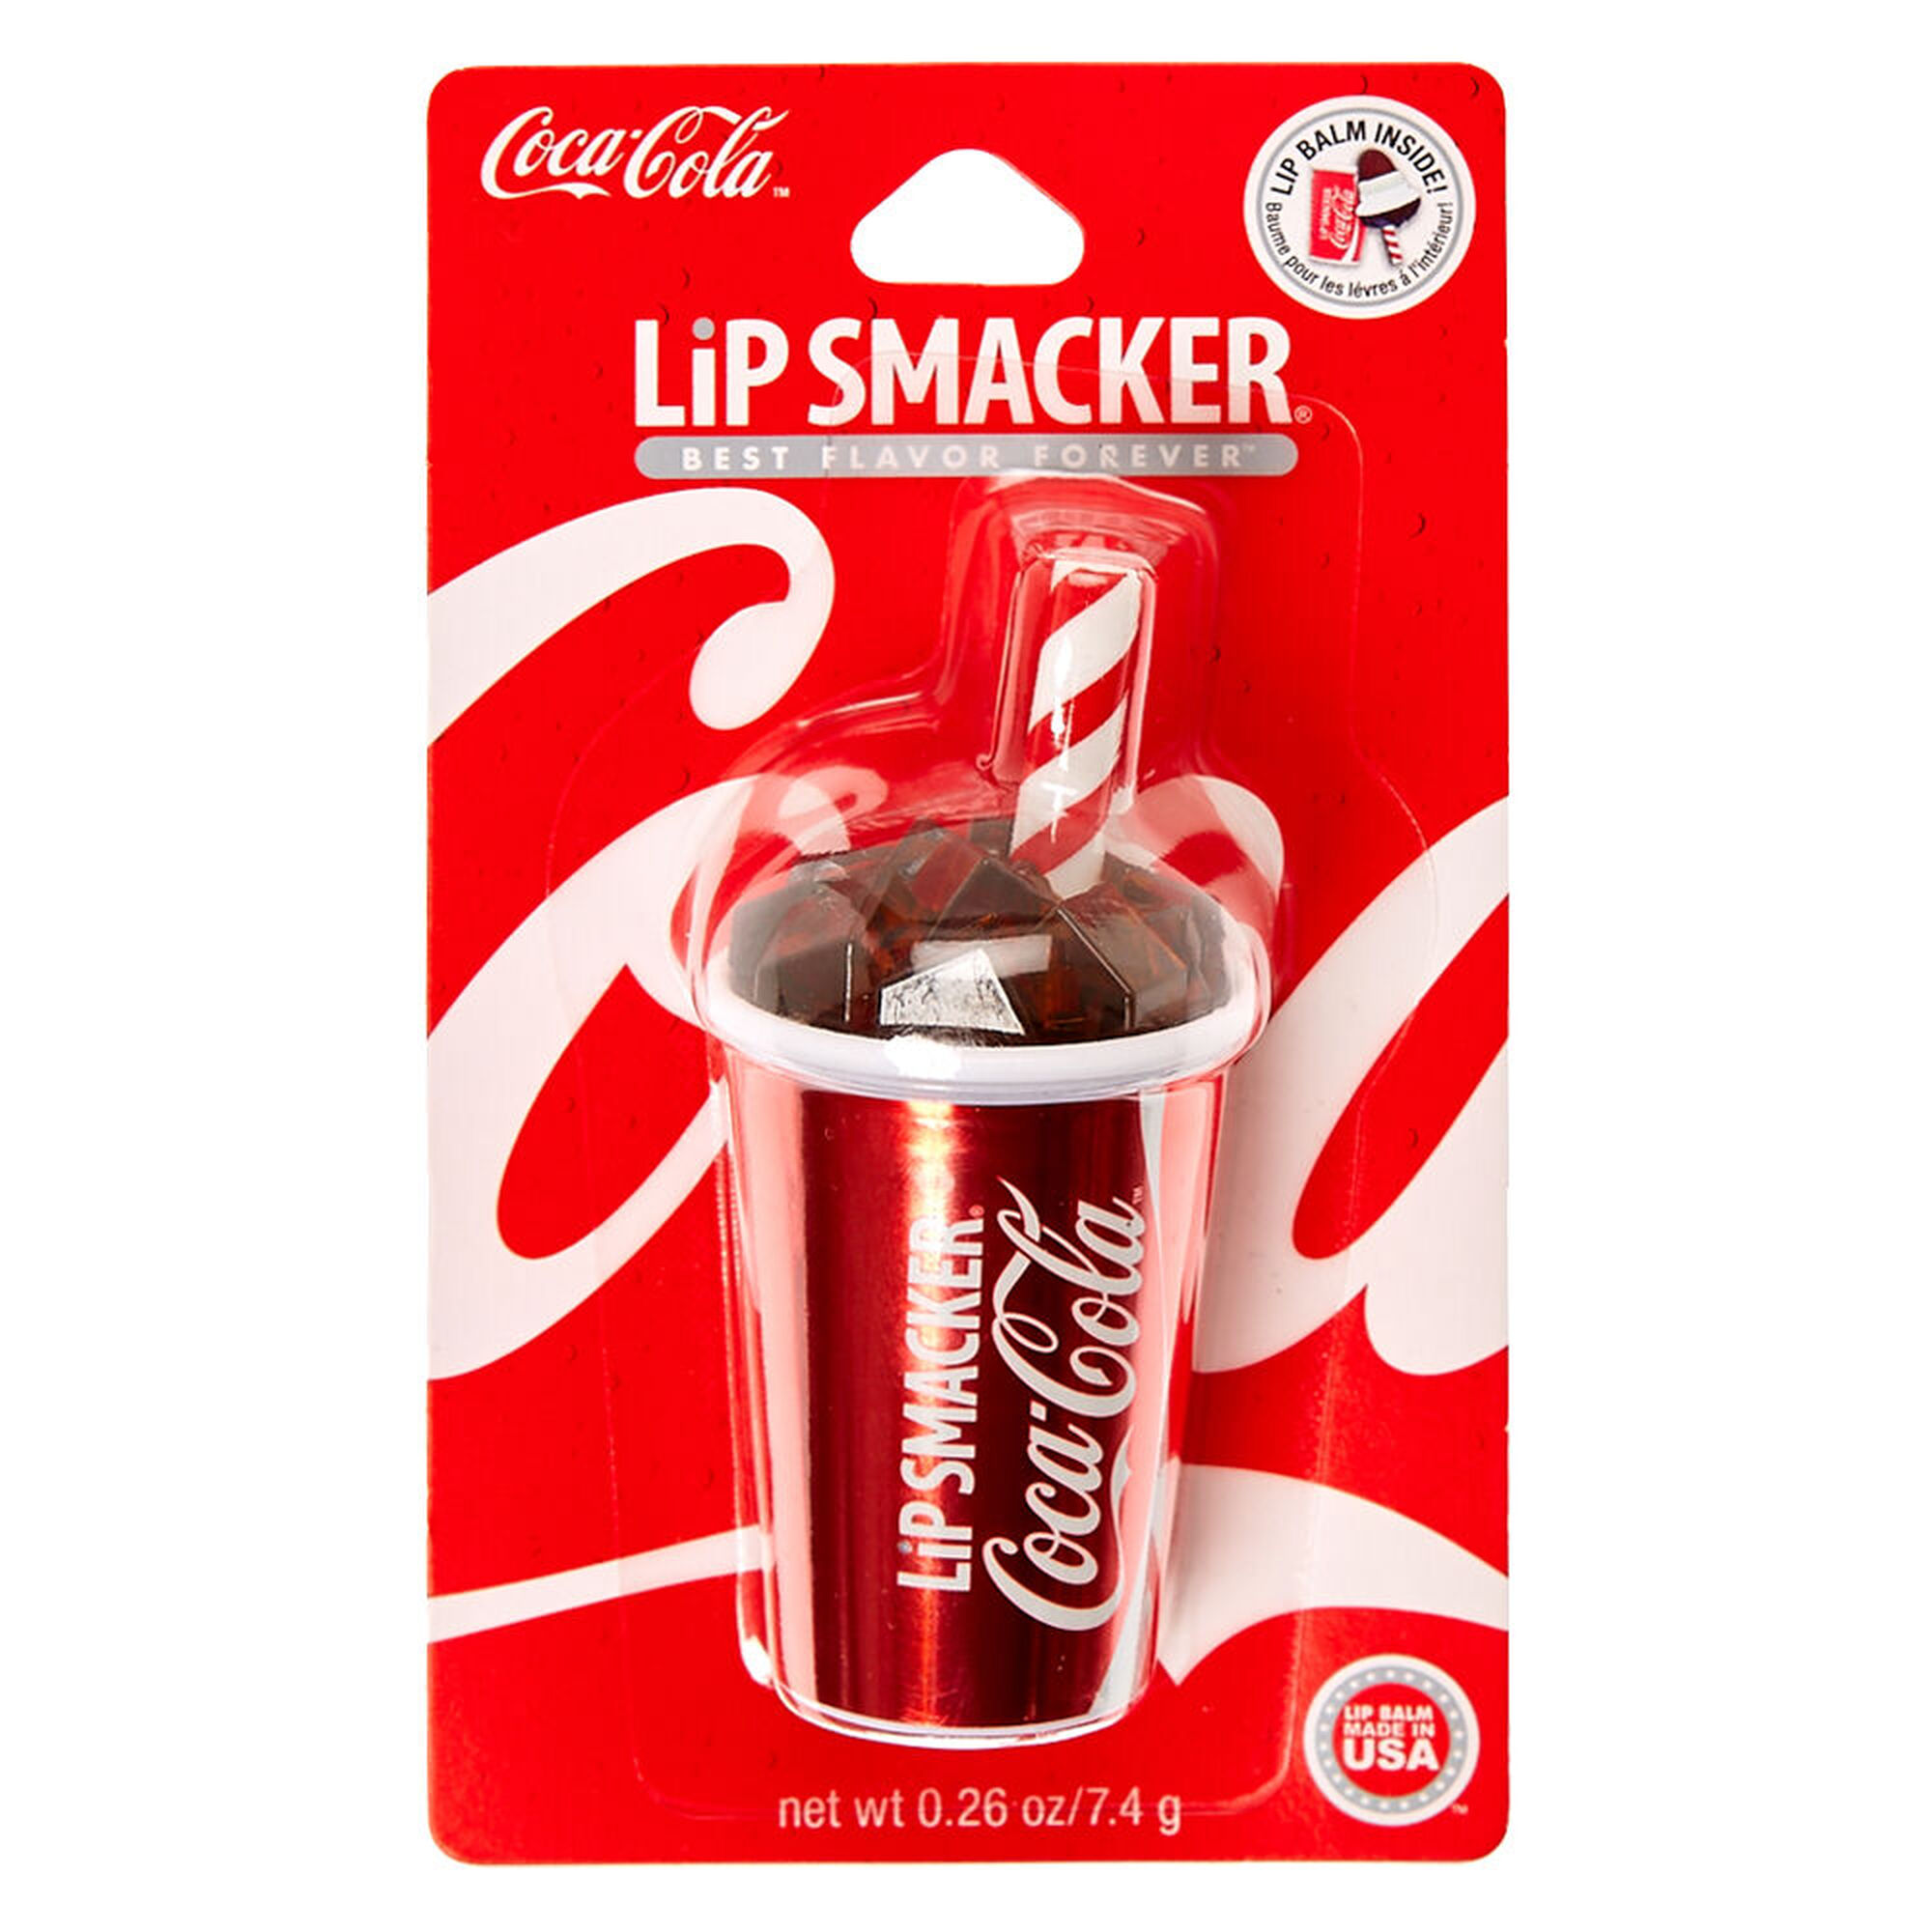 View Claires Lip Smacker CocaCola Cup Balm information